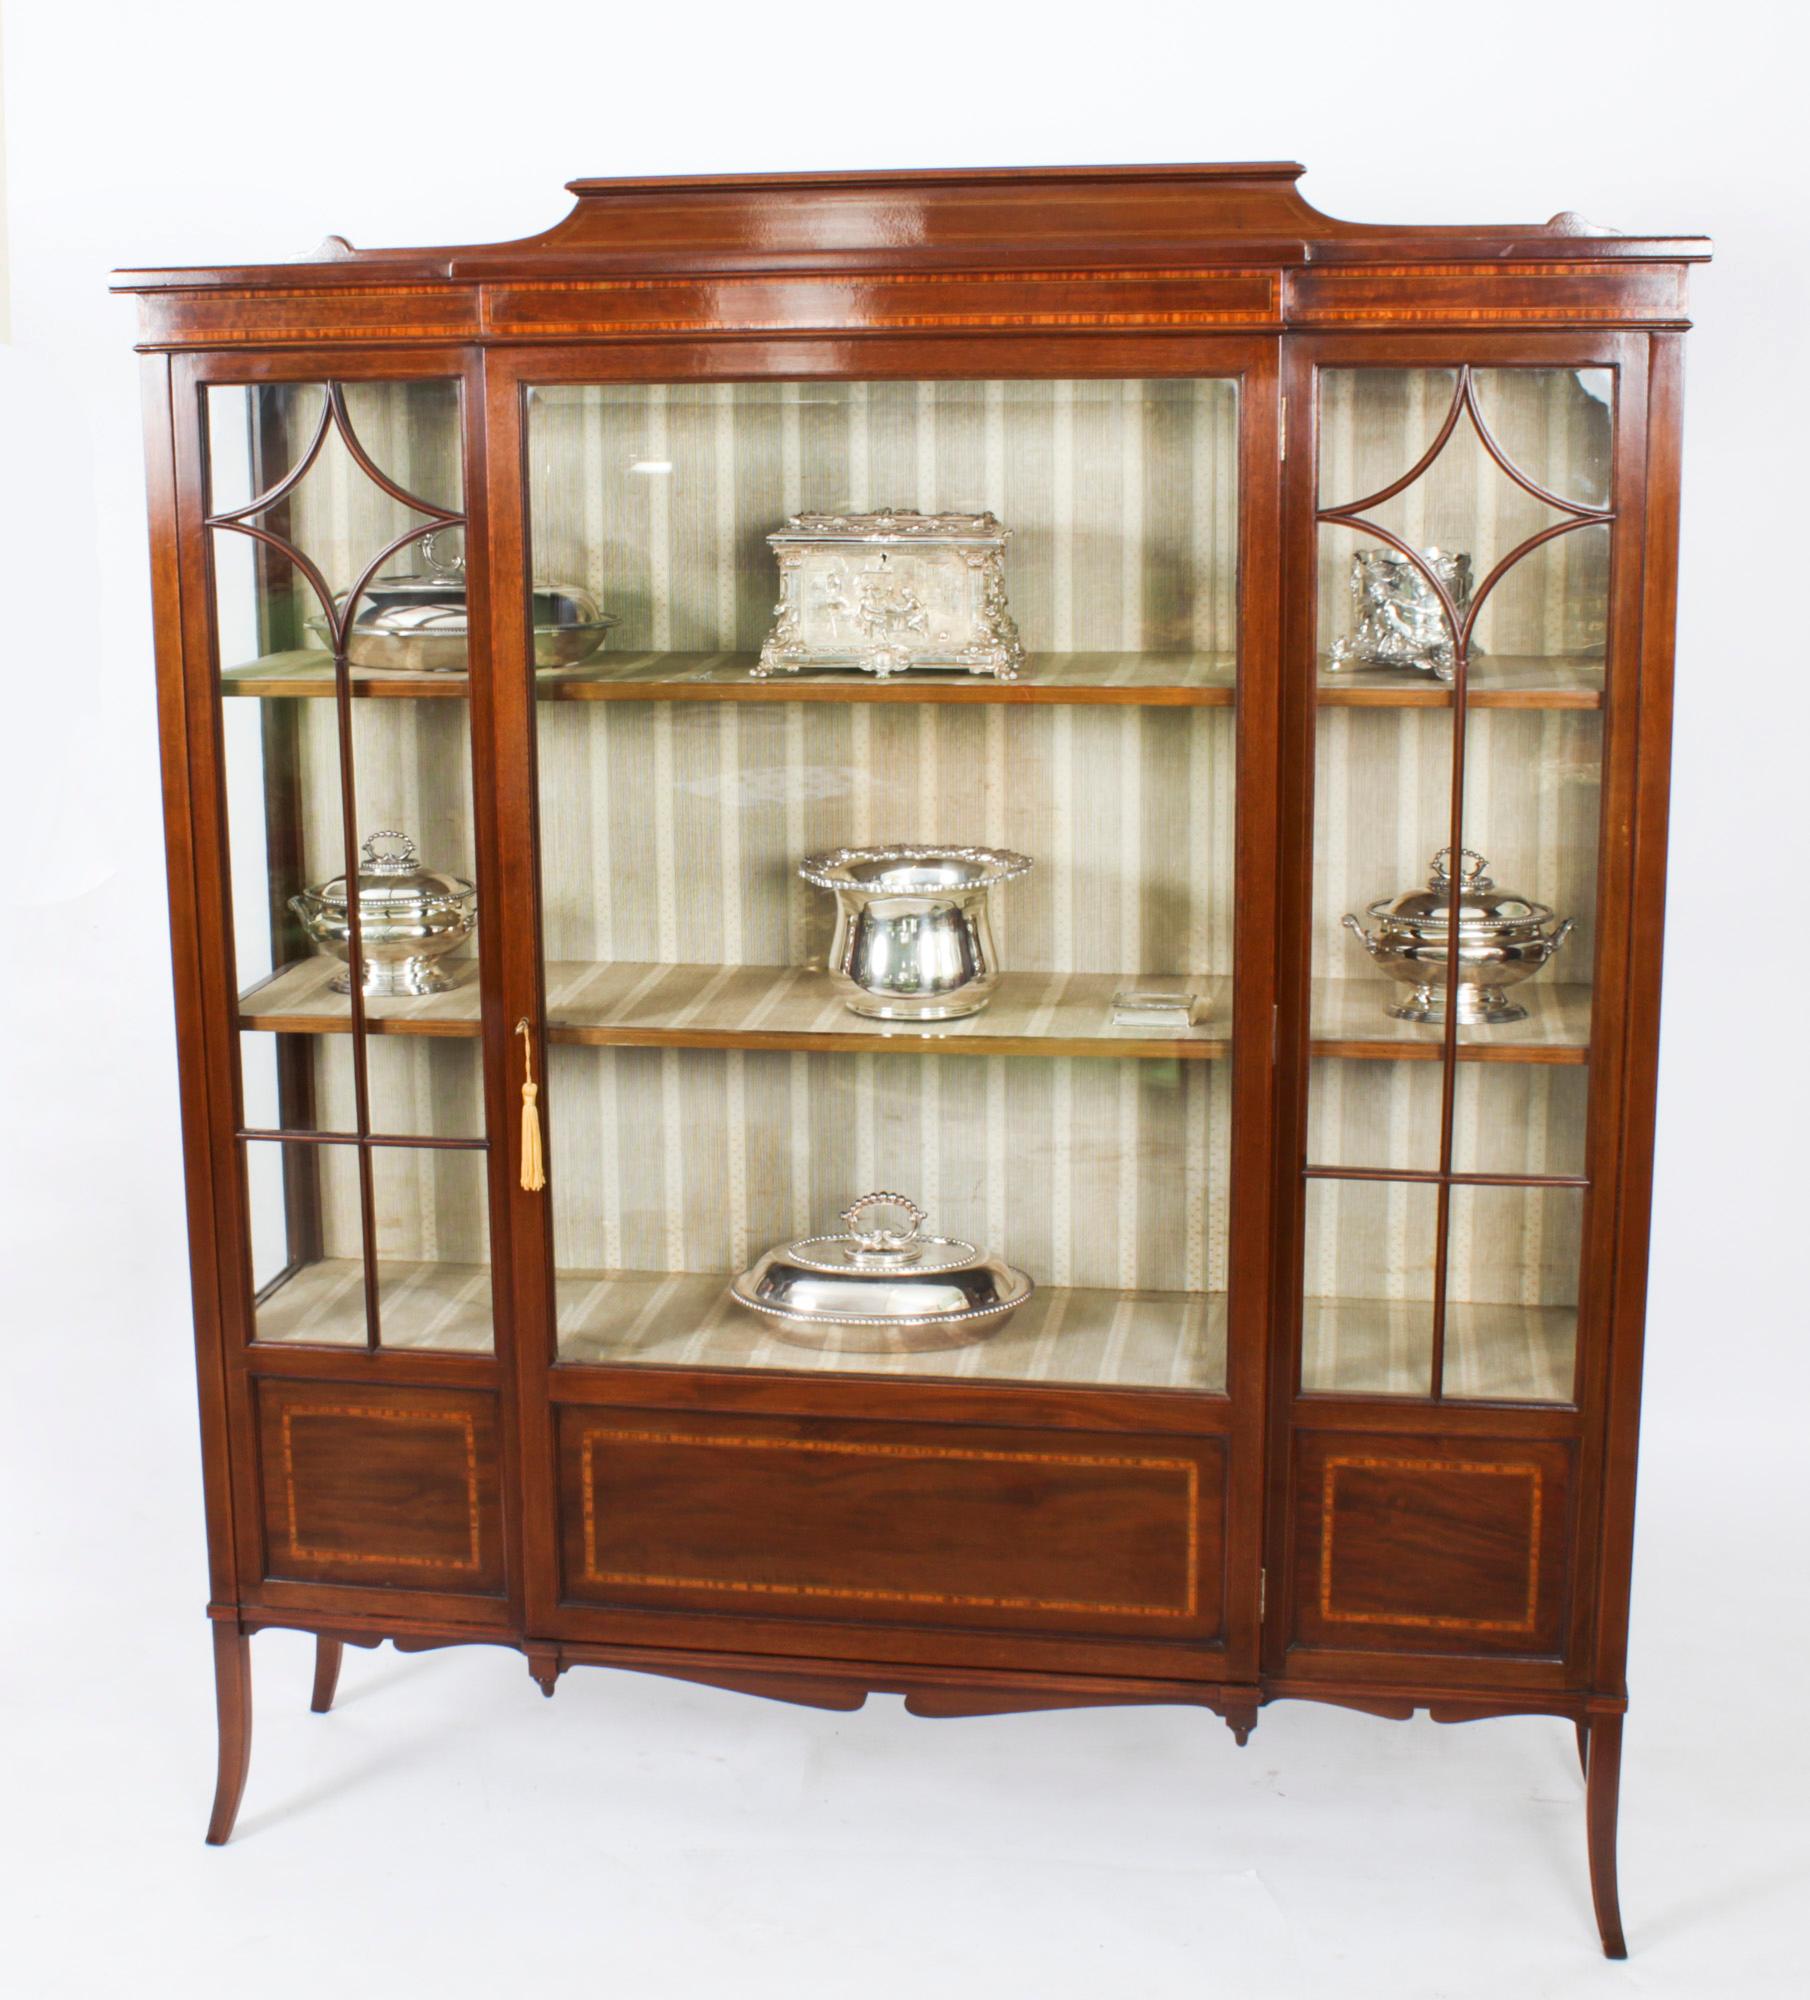 A stunning Edwardian mahogany breakfront glazed display cabinet by Maple & Co., Circa 1900 in date.

Beautifully decorated throughout with with ebony and boxwood crossbanding and stringing, the shaped raised back and rectangular top over glazed